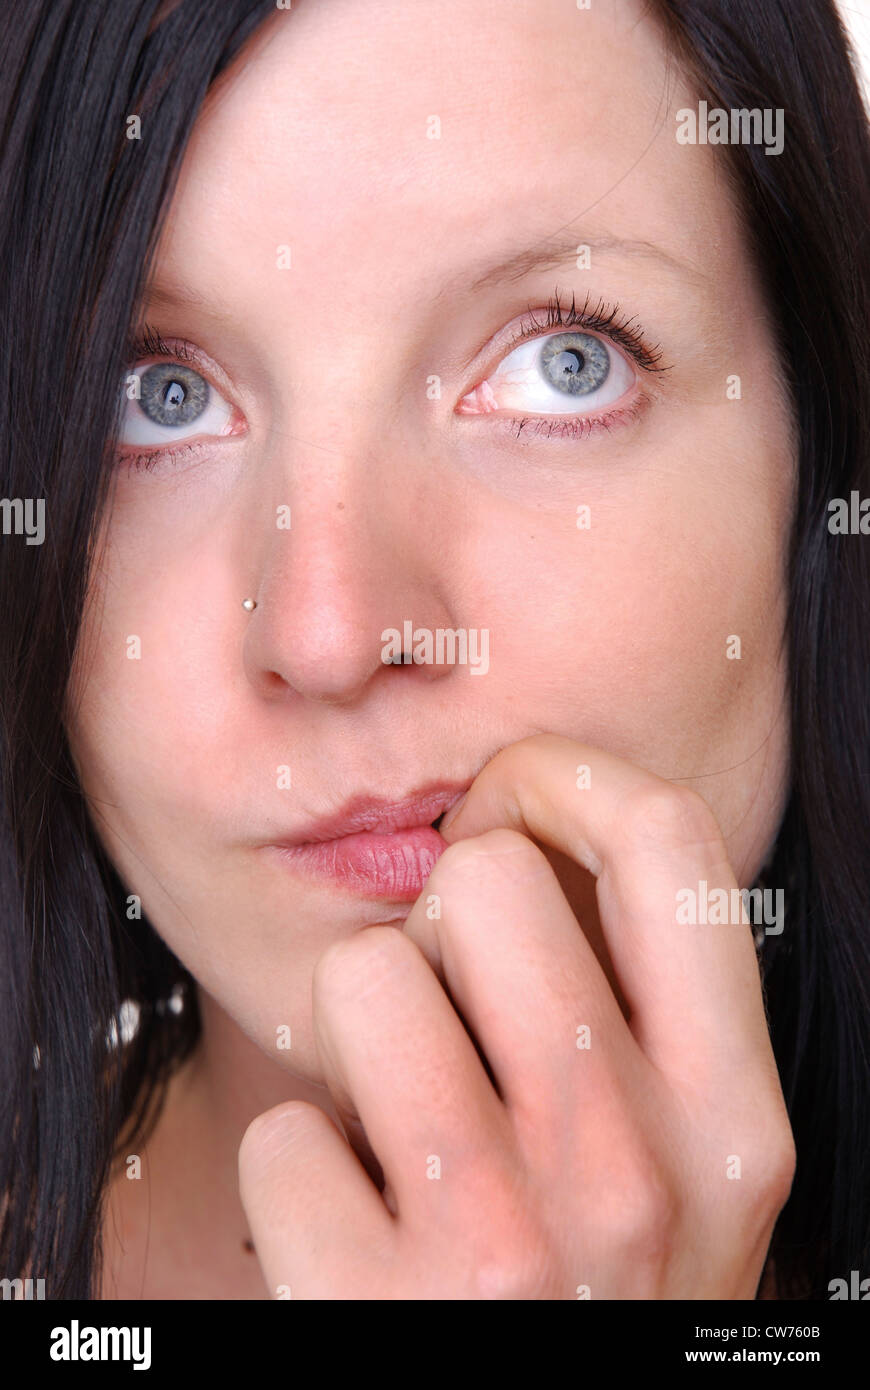 Woman chews at her finger Stock Photo